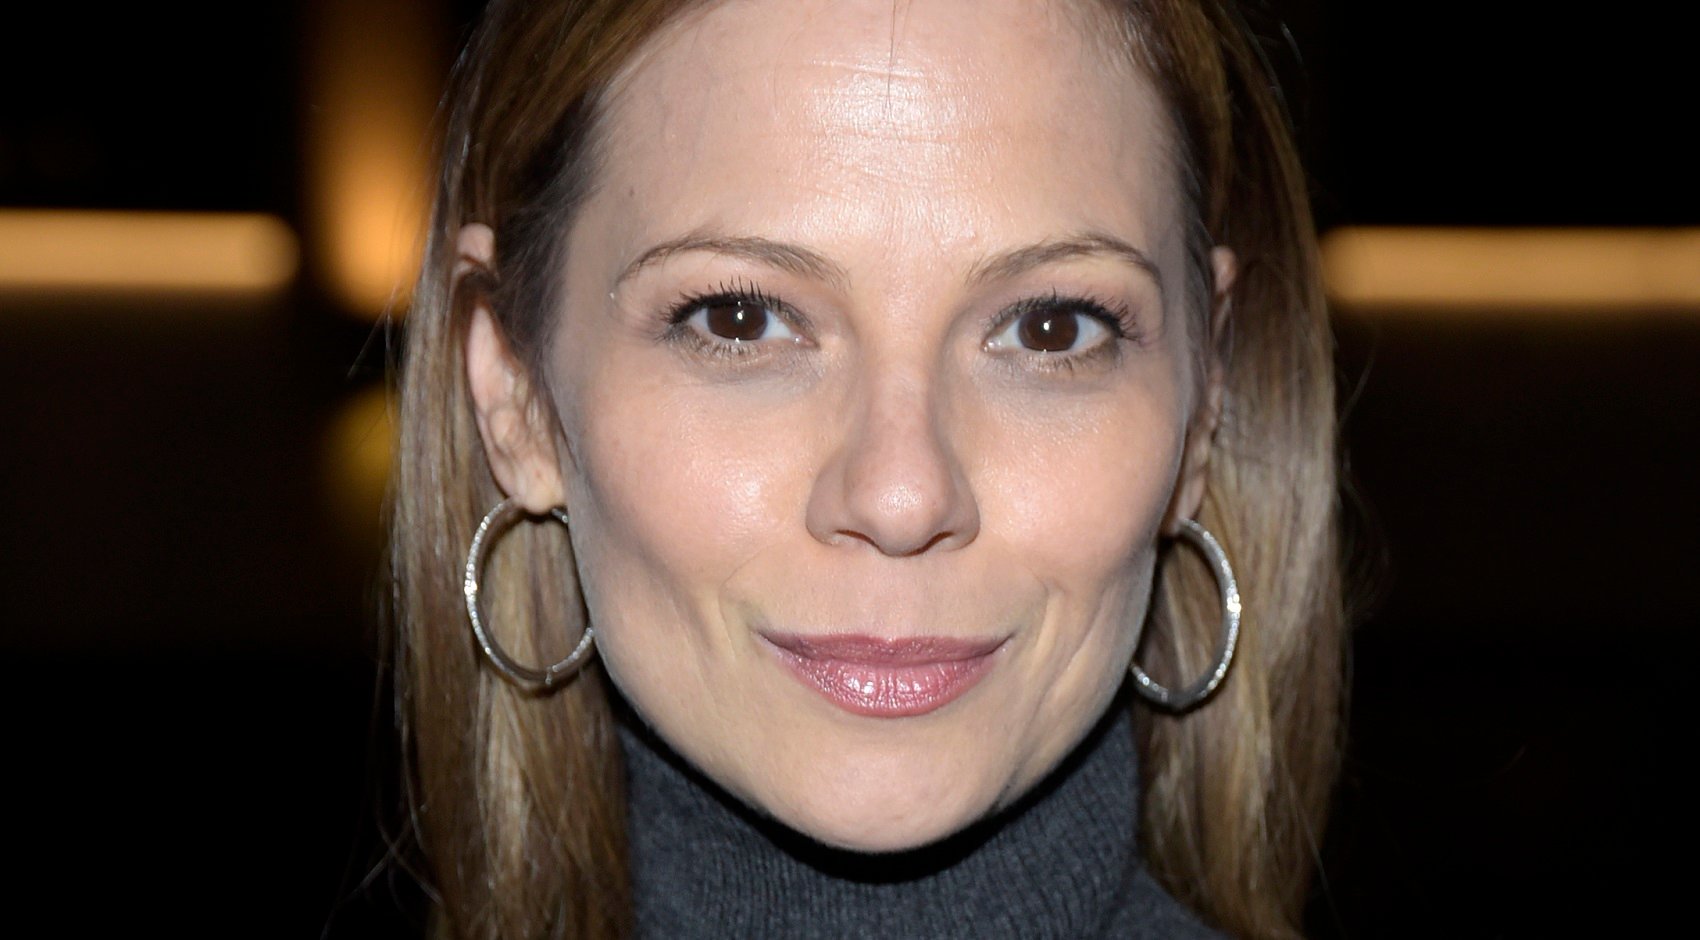 Days of Our Lives speculation focuses on Ava, played by Tamara Braun, whose headshot is pictured here